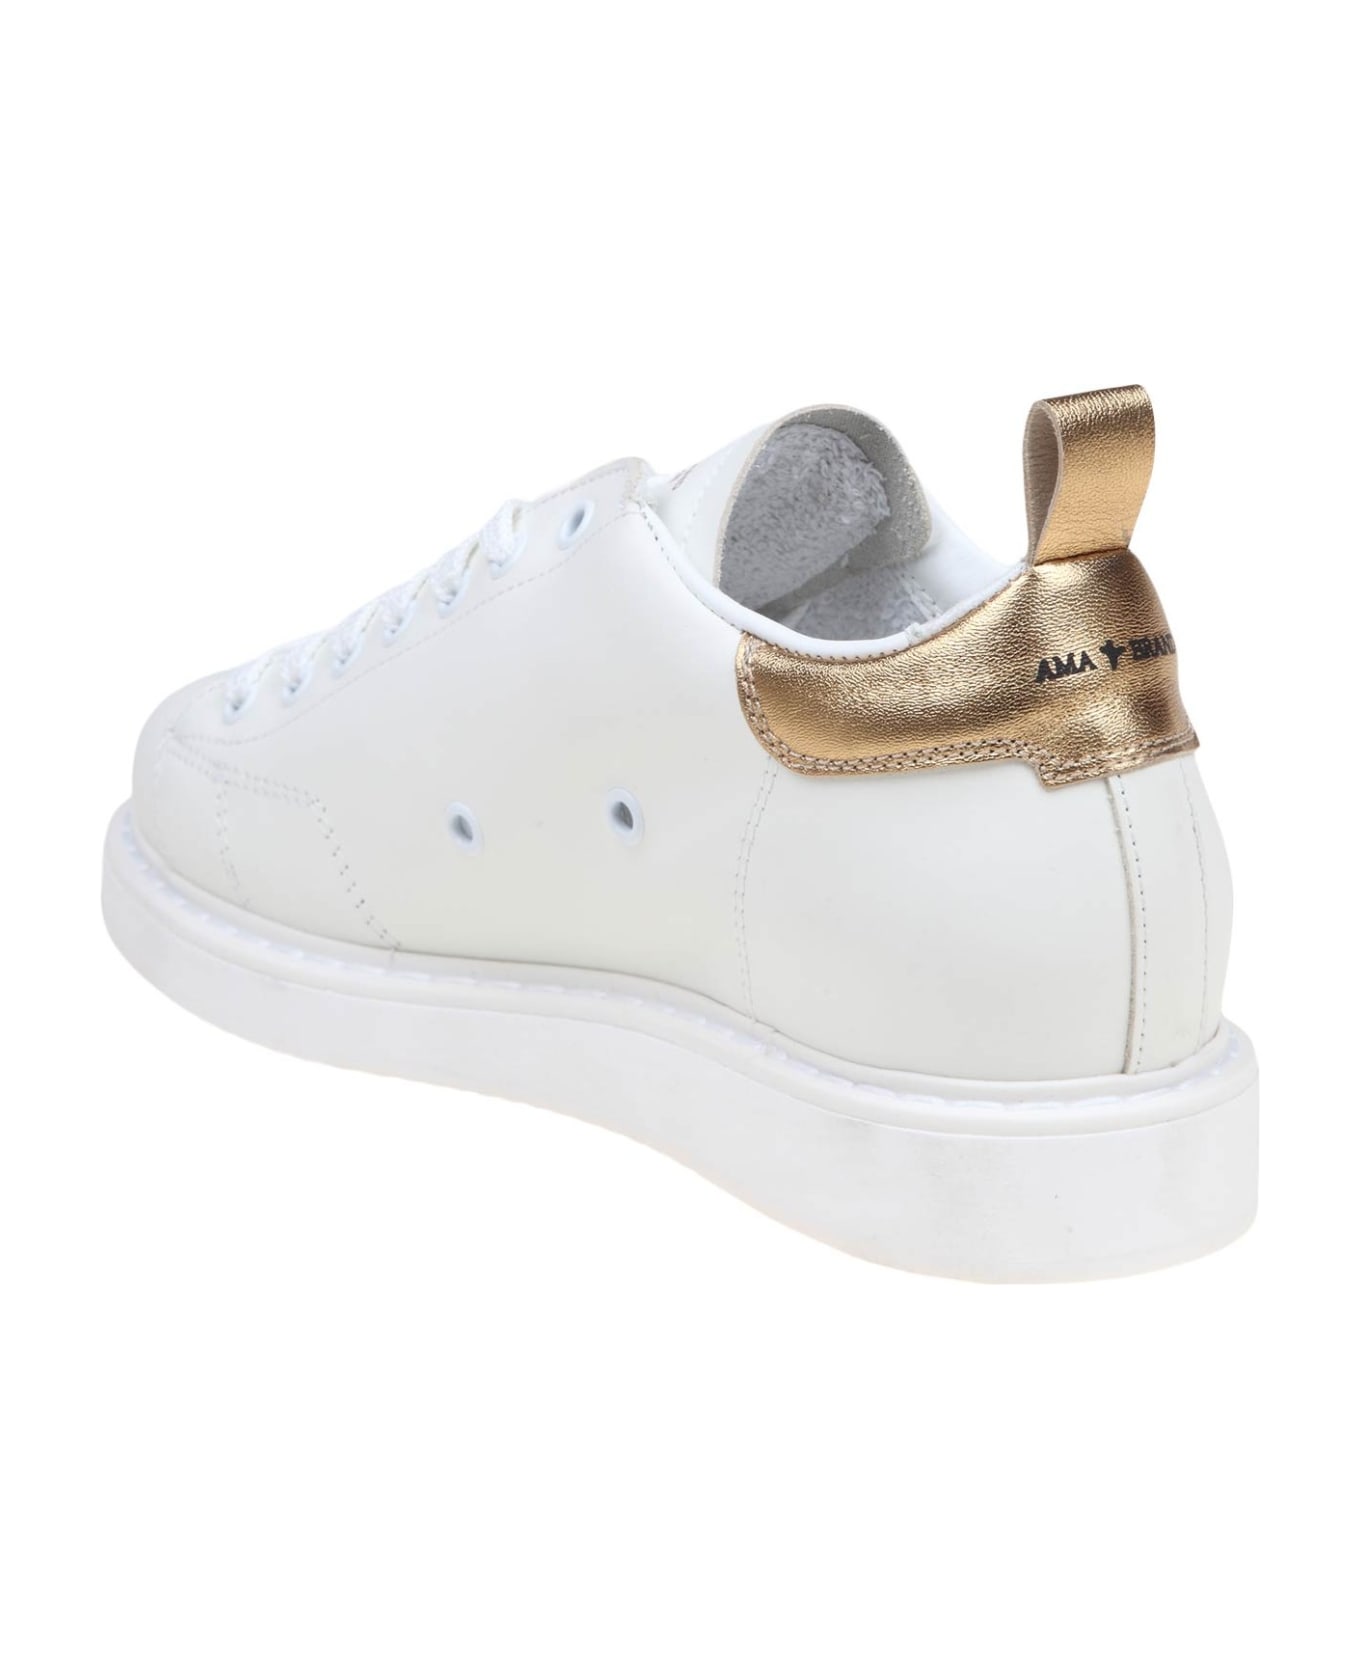 AMA-BRAND White And Gold Leather Sneakers - WHITE/GOLD